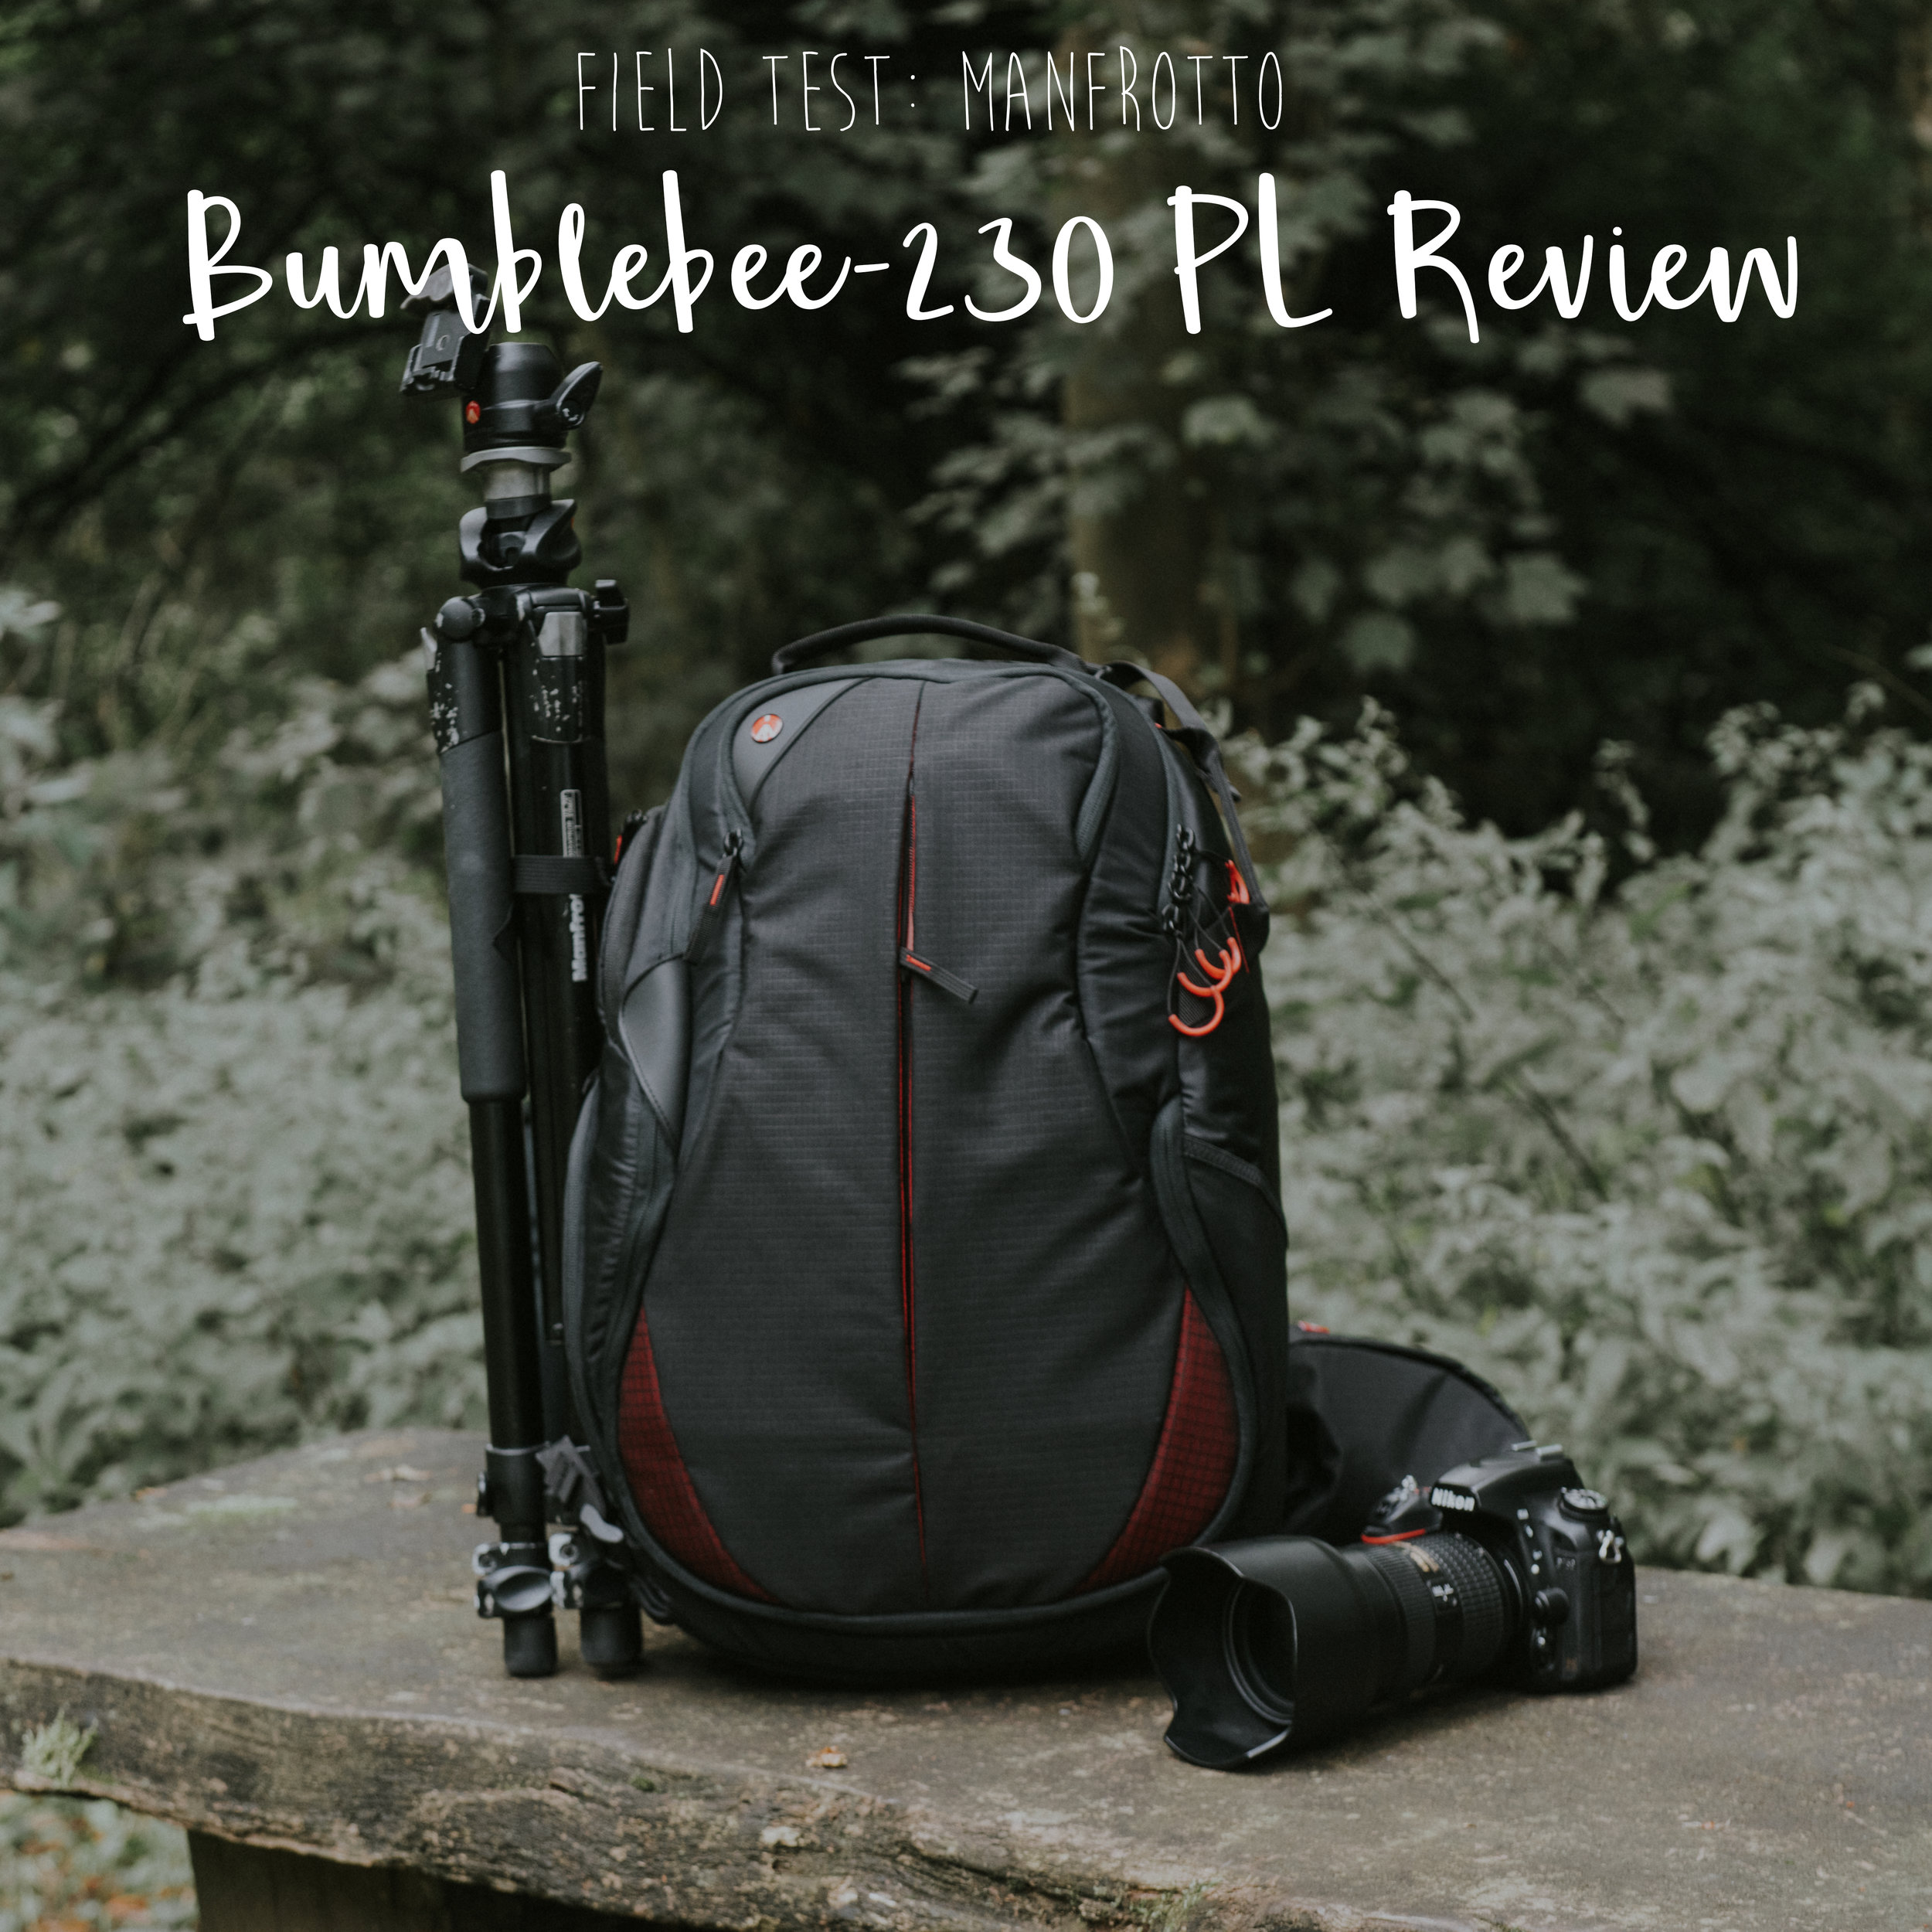 Field Test: Manfrotto Bumblebee-230 PL Review — Luke Holroyd 